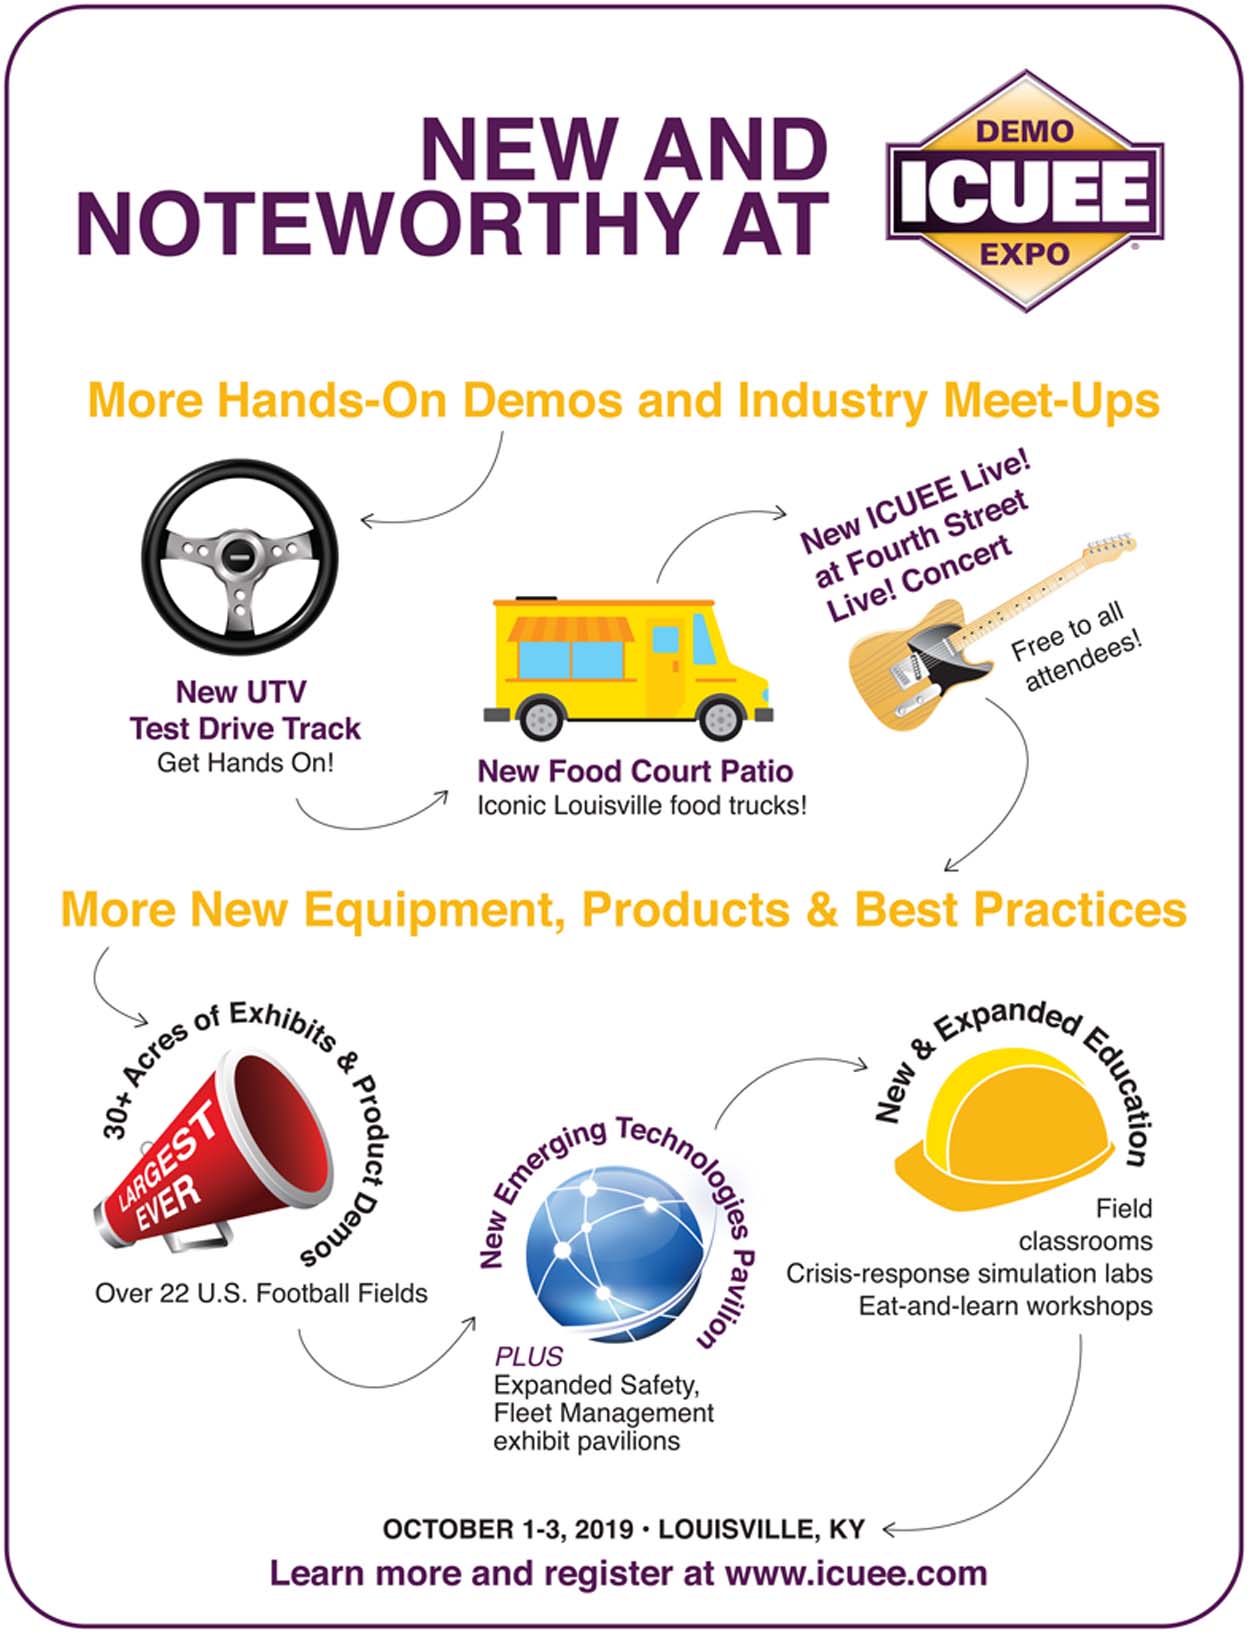 New and noteworthy at ICUEE 2019